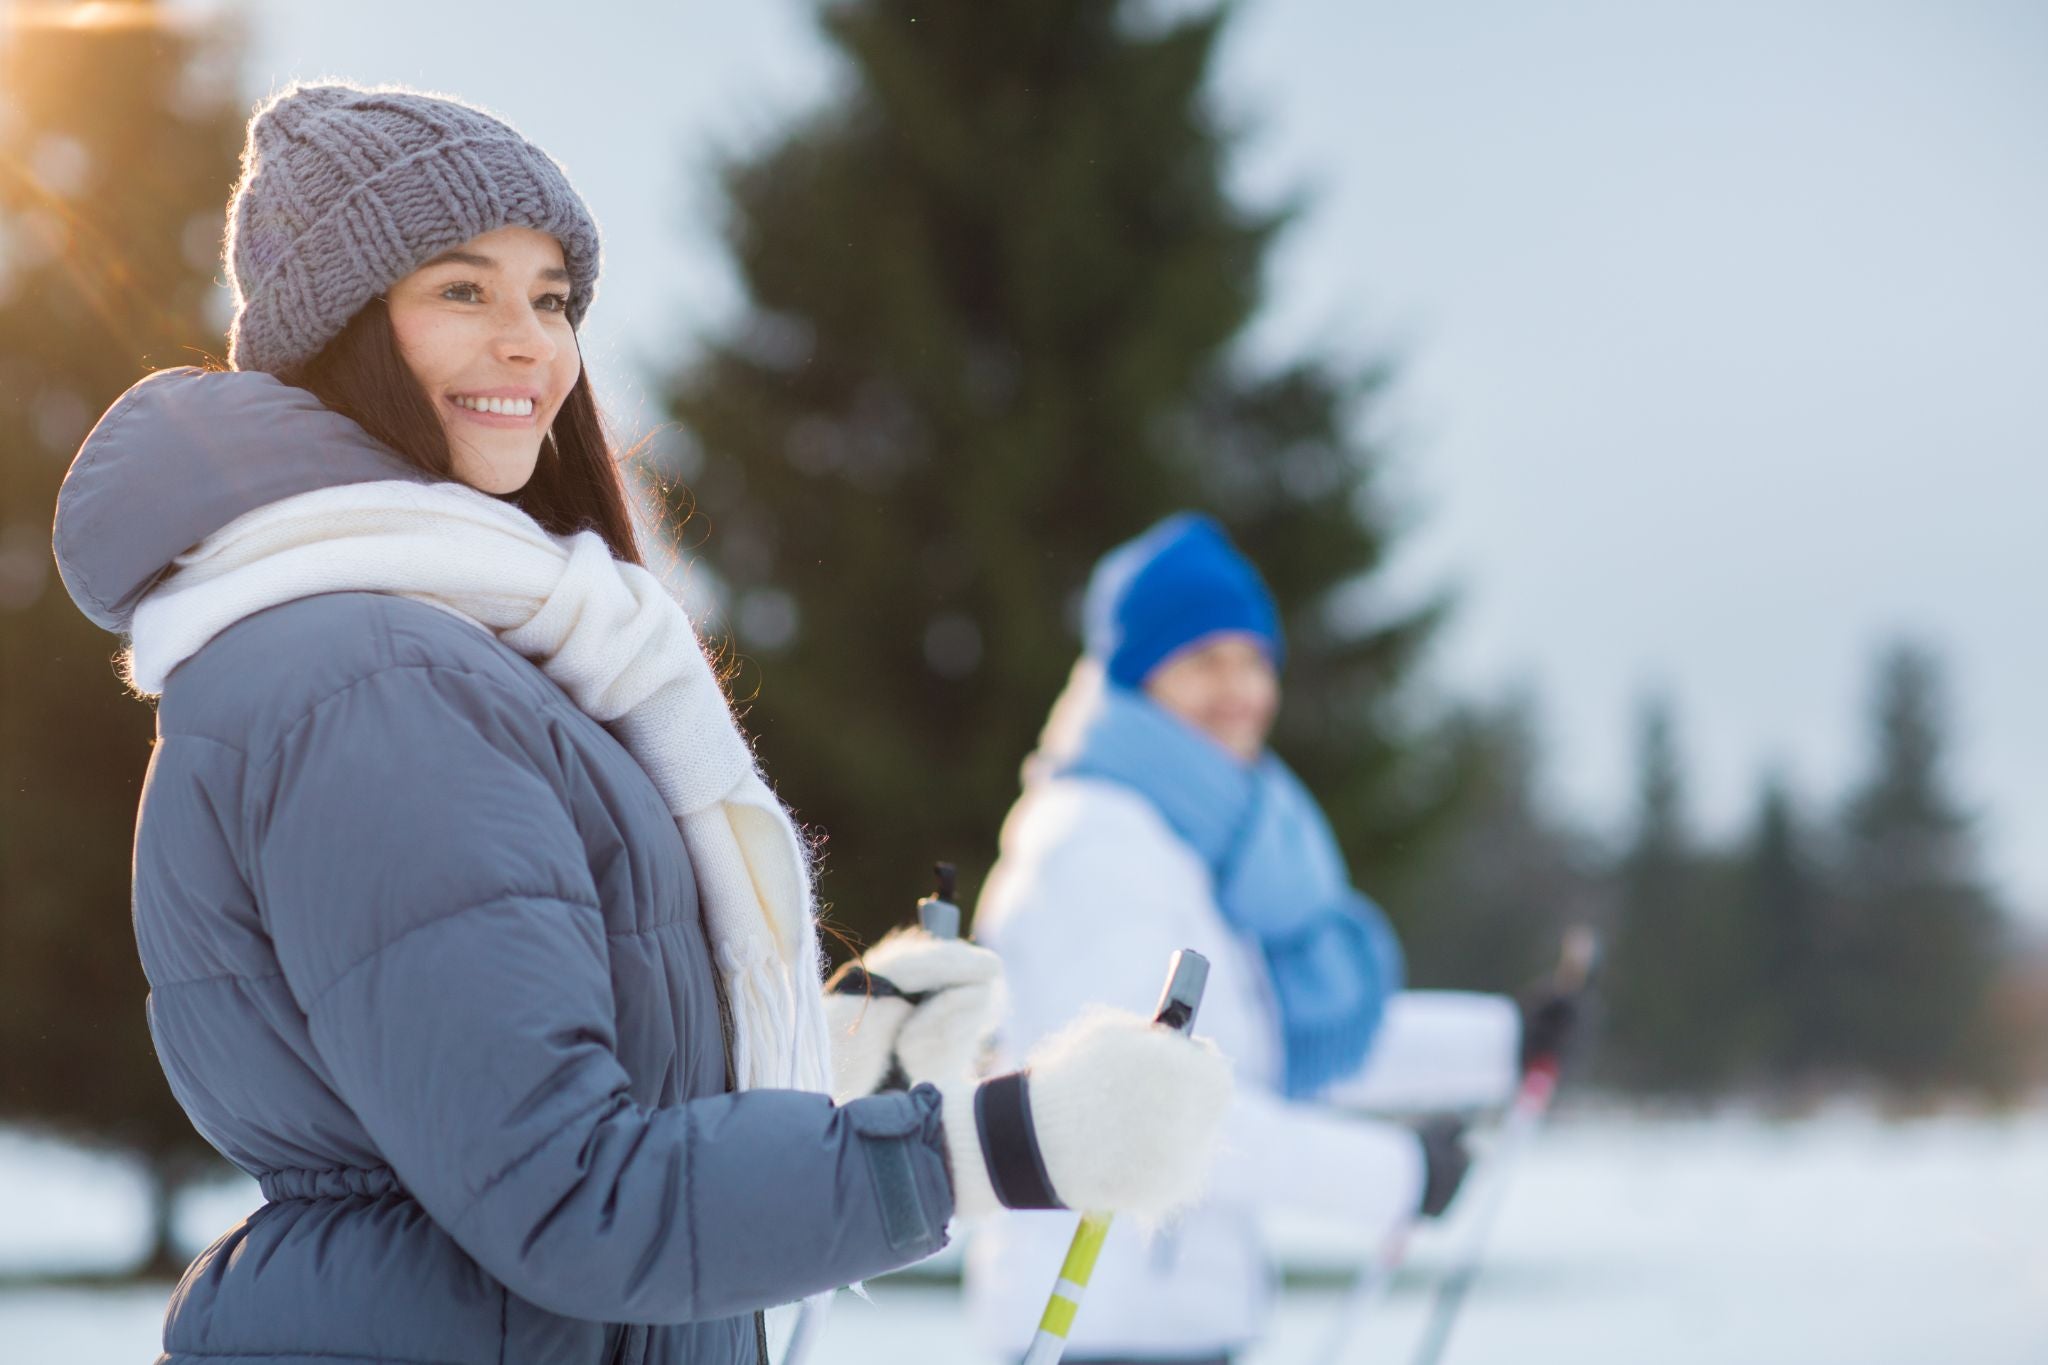 Winter Activities During Pregnancy: What to Avoid – SNUG360